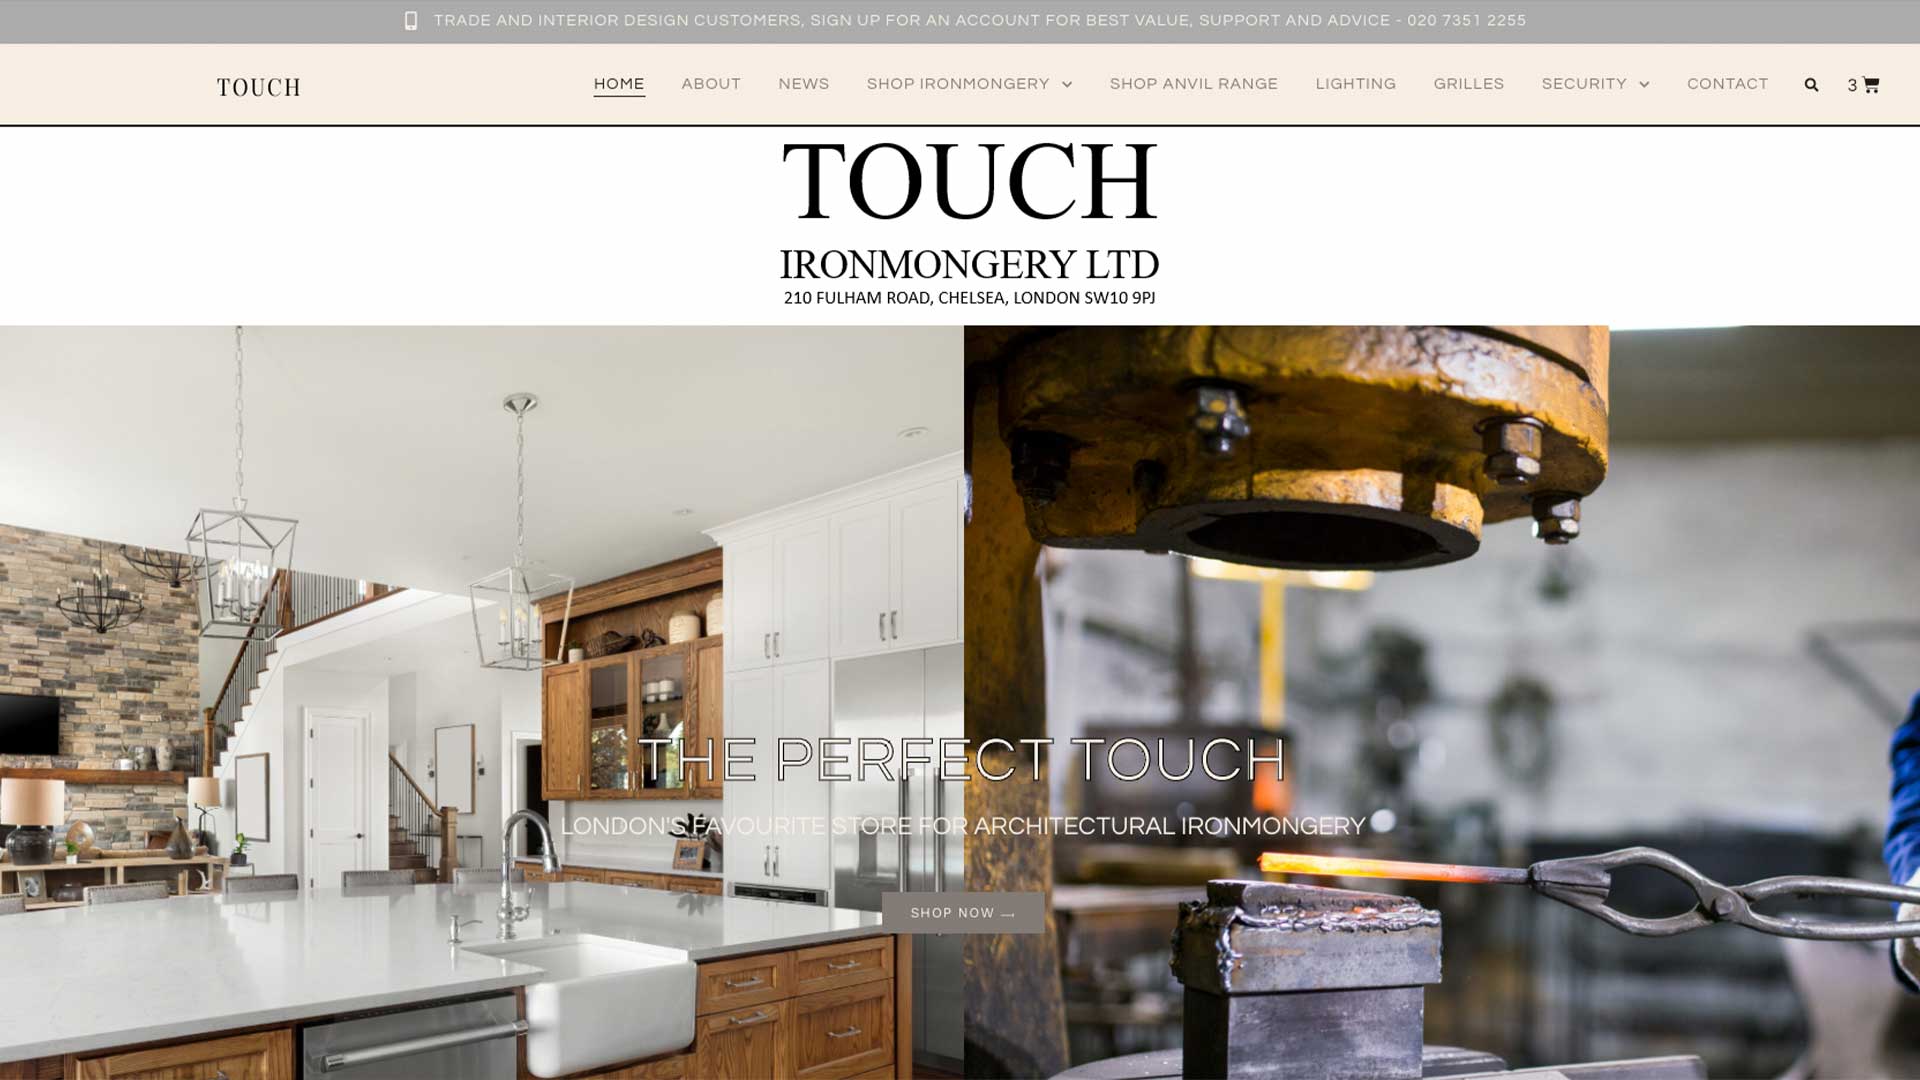 New site for Touch Ironmongery in Fulham, London